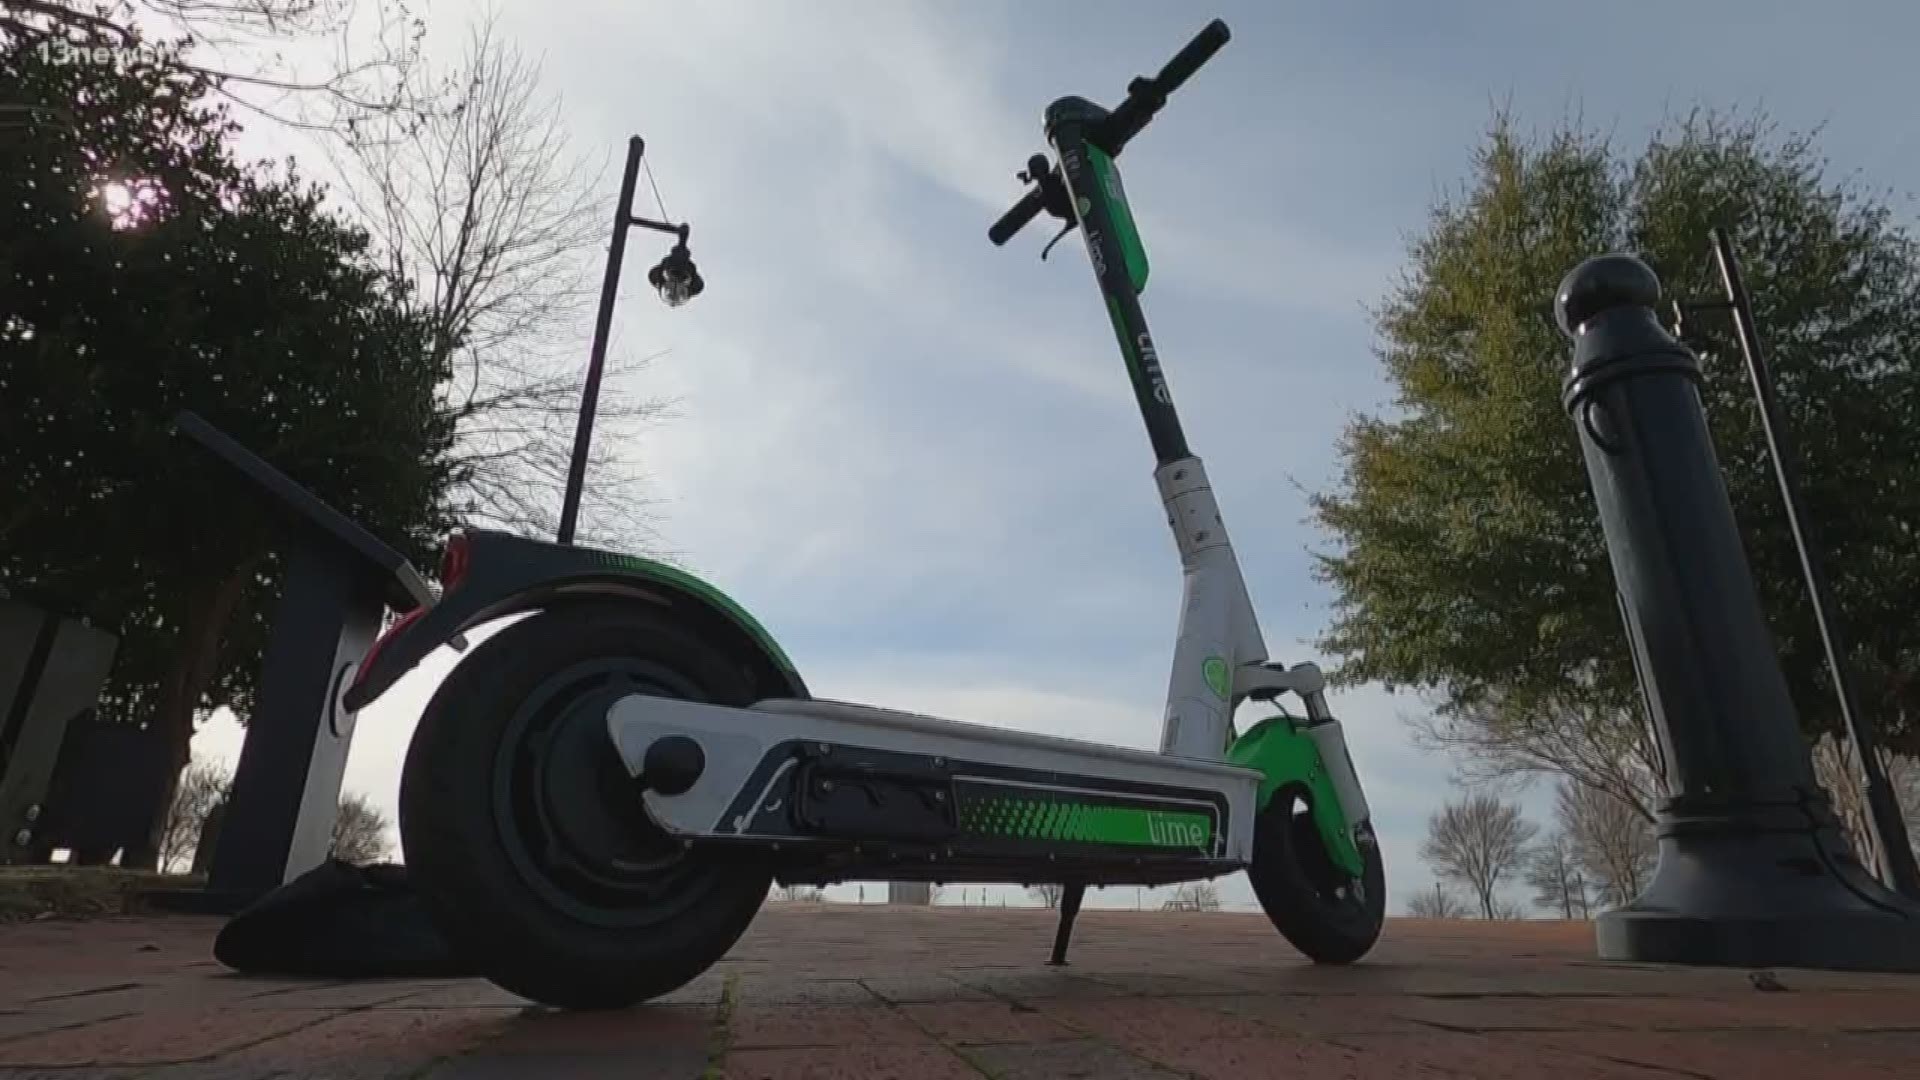 This spring, scooter riders will have to follow speed limits and area regulations at the Virginia Beach Oceanfront. City Council hopes to ensure safer rides.